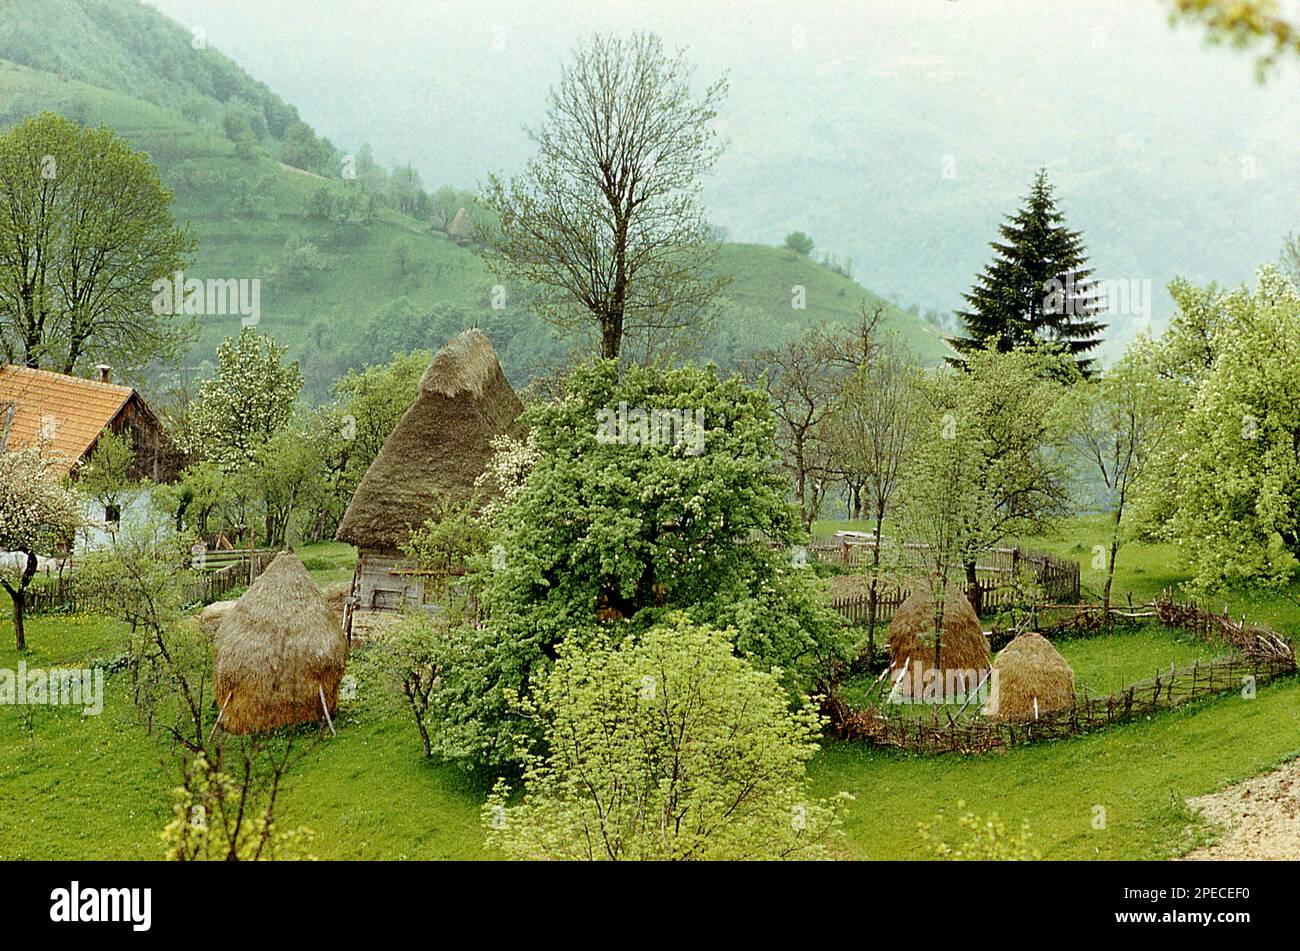 Hunedoara County, Romania, 1980. A rural property in the Orastiei Mountains, with a house, a traditional thatched straw roof shed, and haystacks. Stock Photo